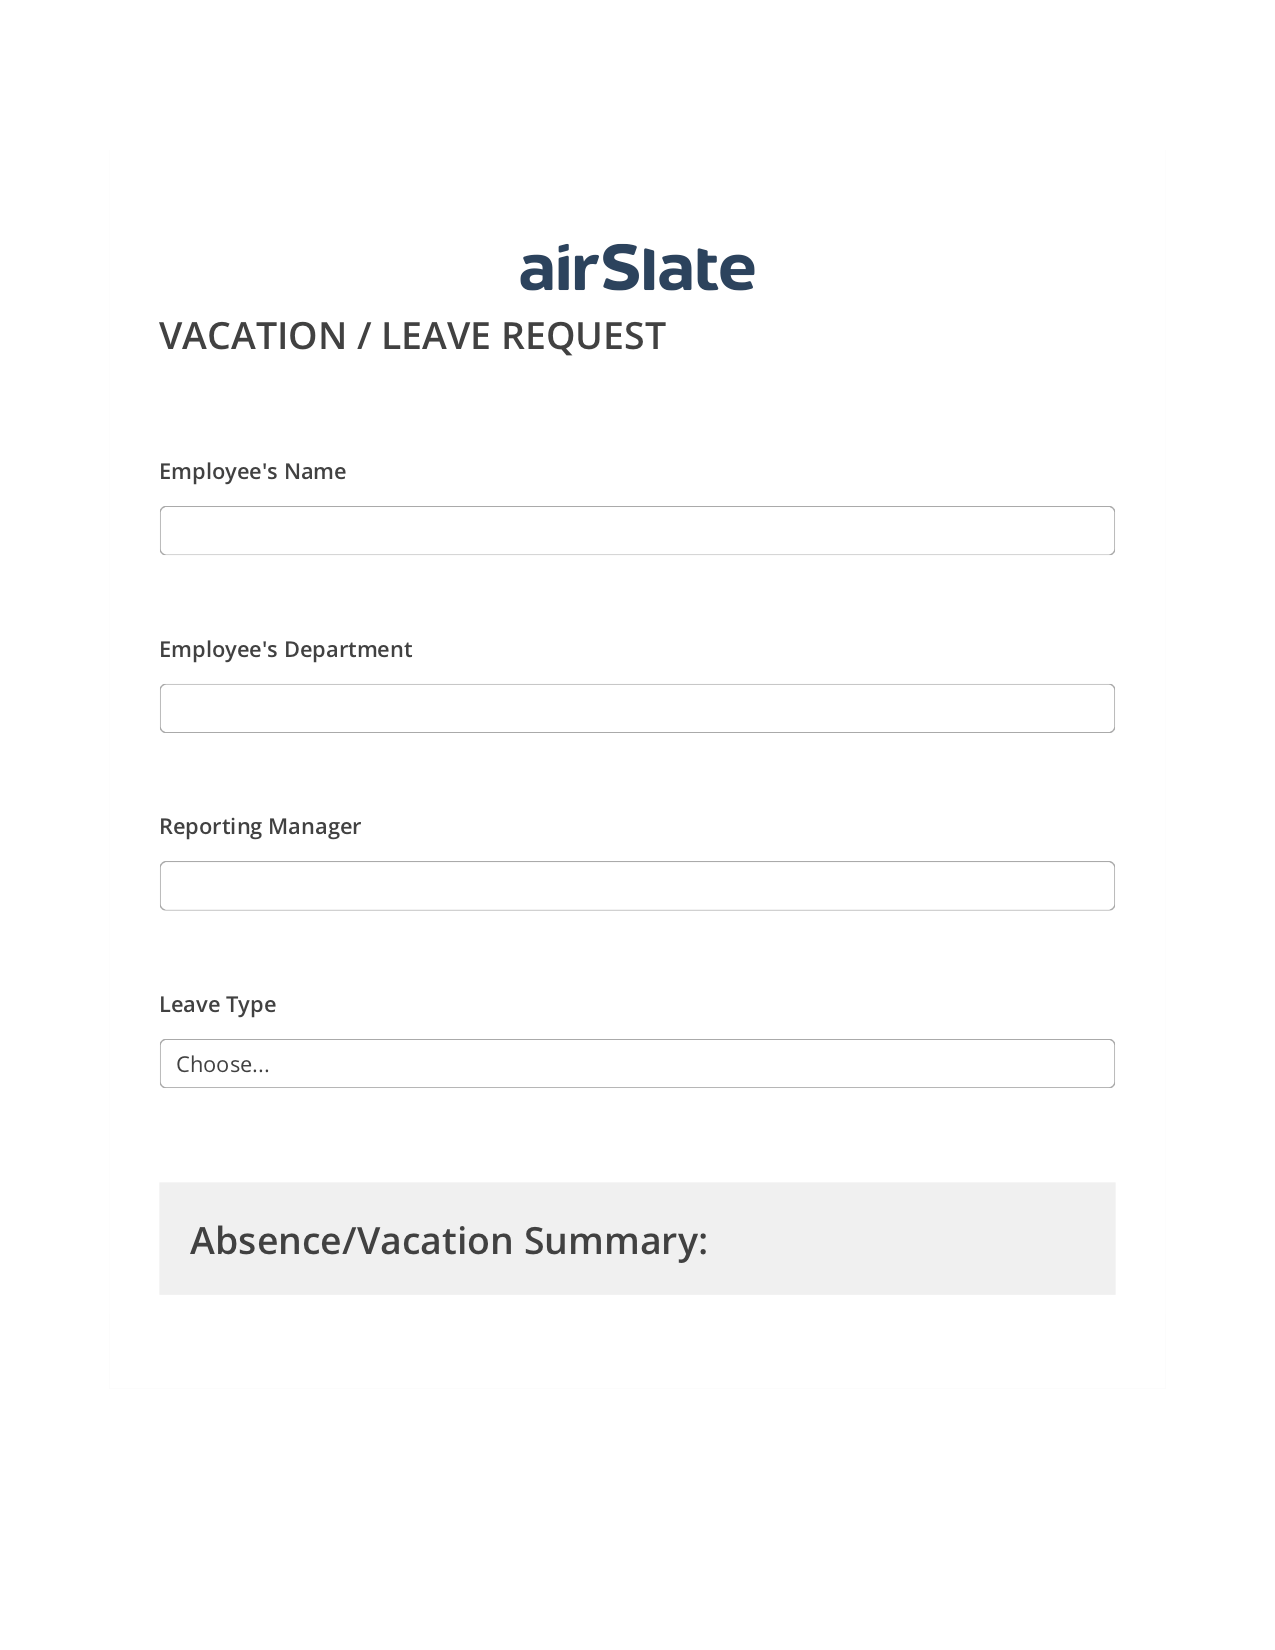 Vacation/Leave Request Workflow Pre-fill from CSV File Bot, Reminder Bot, Export to WebMerge Bot